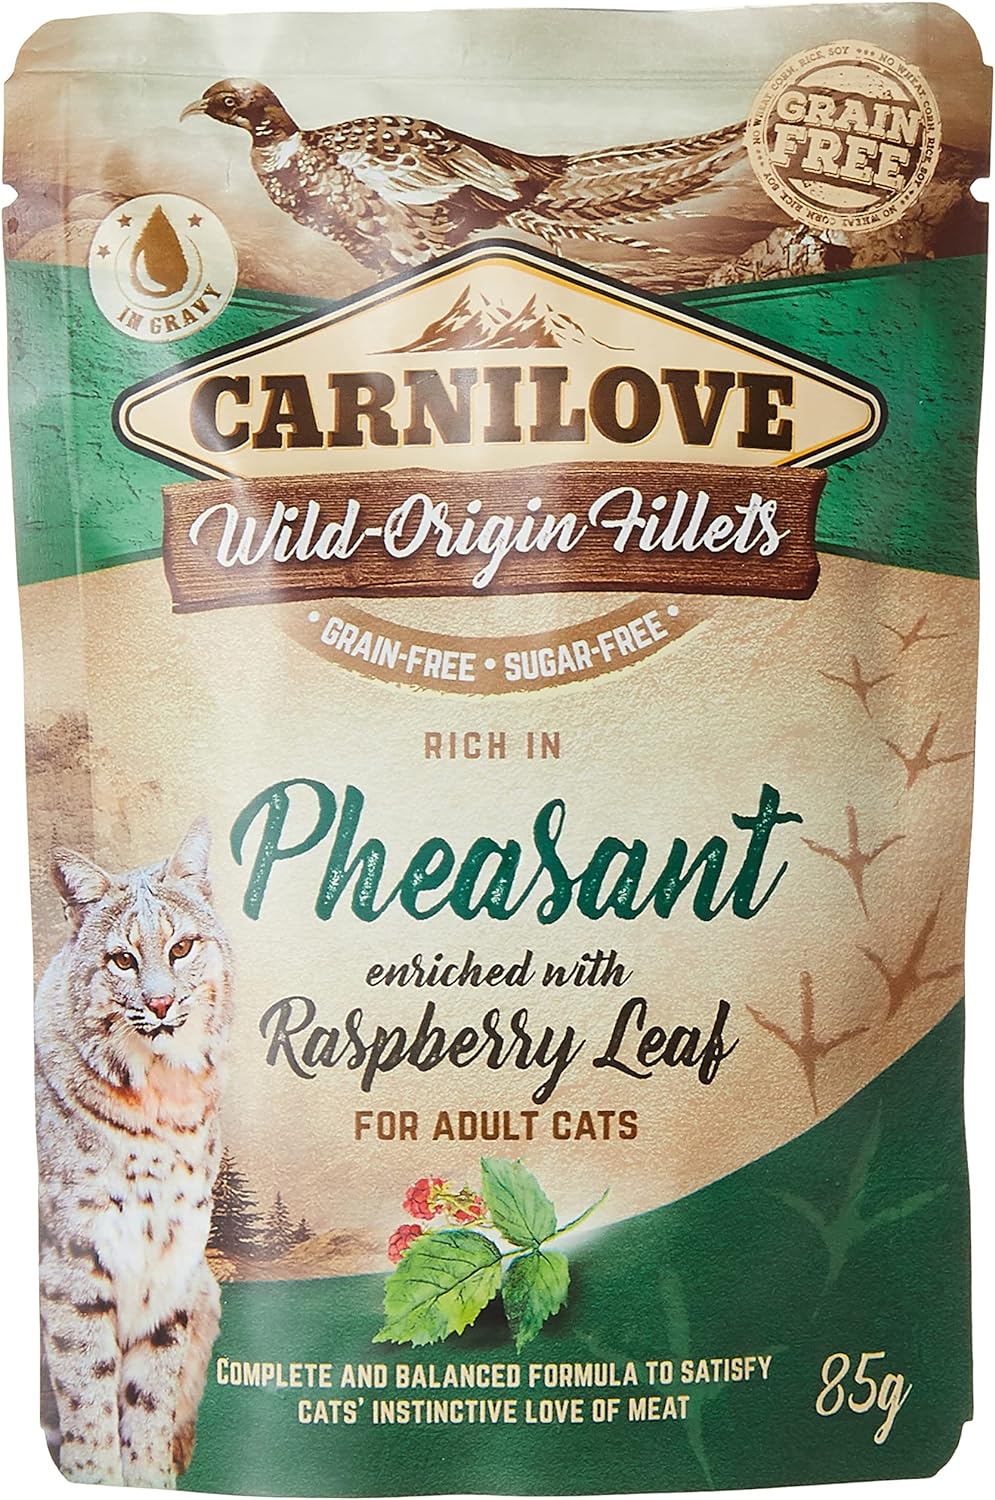 Carnilove Pheasant enriched with Raspberry Leaves for Adult Cats (Wet Food Pouches) 85g